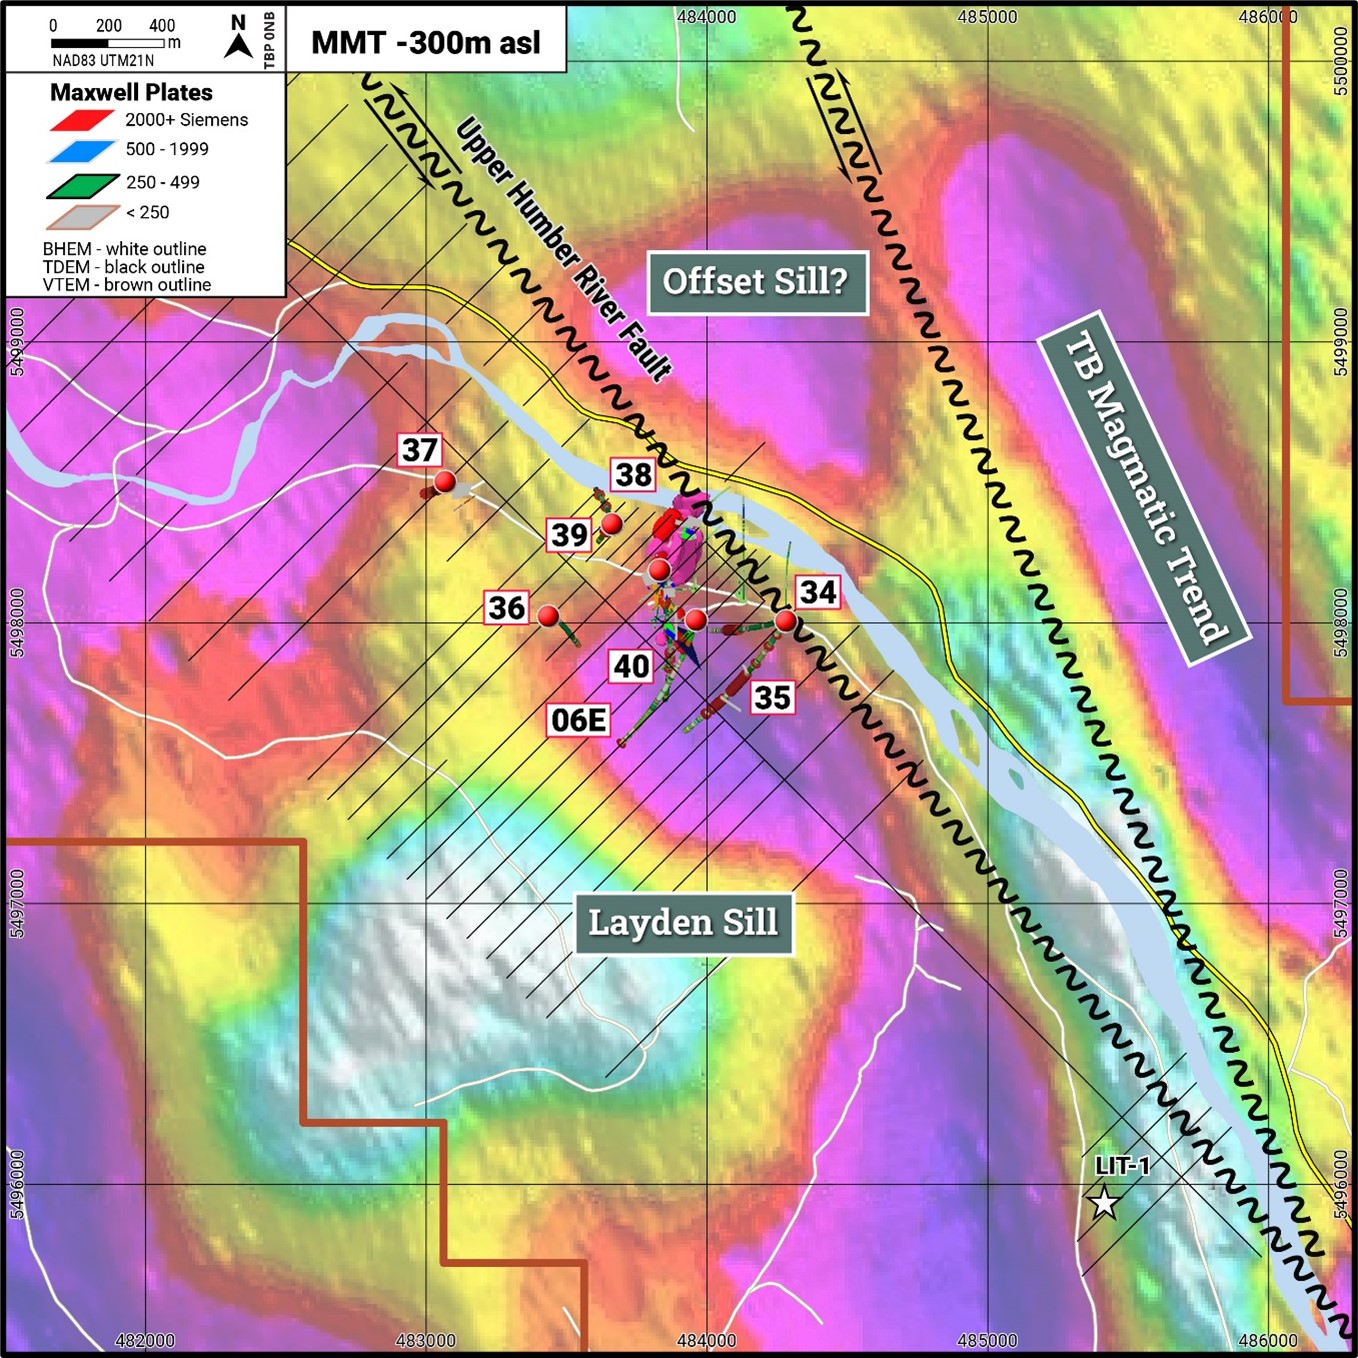 Layden Area Detailed Drilling and MMT Plan